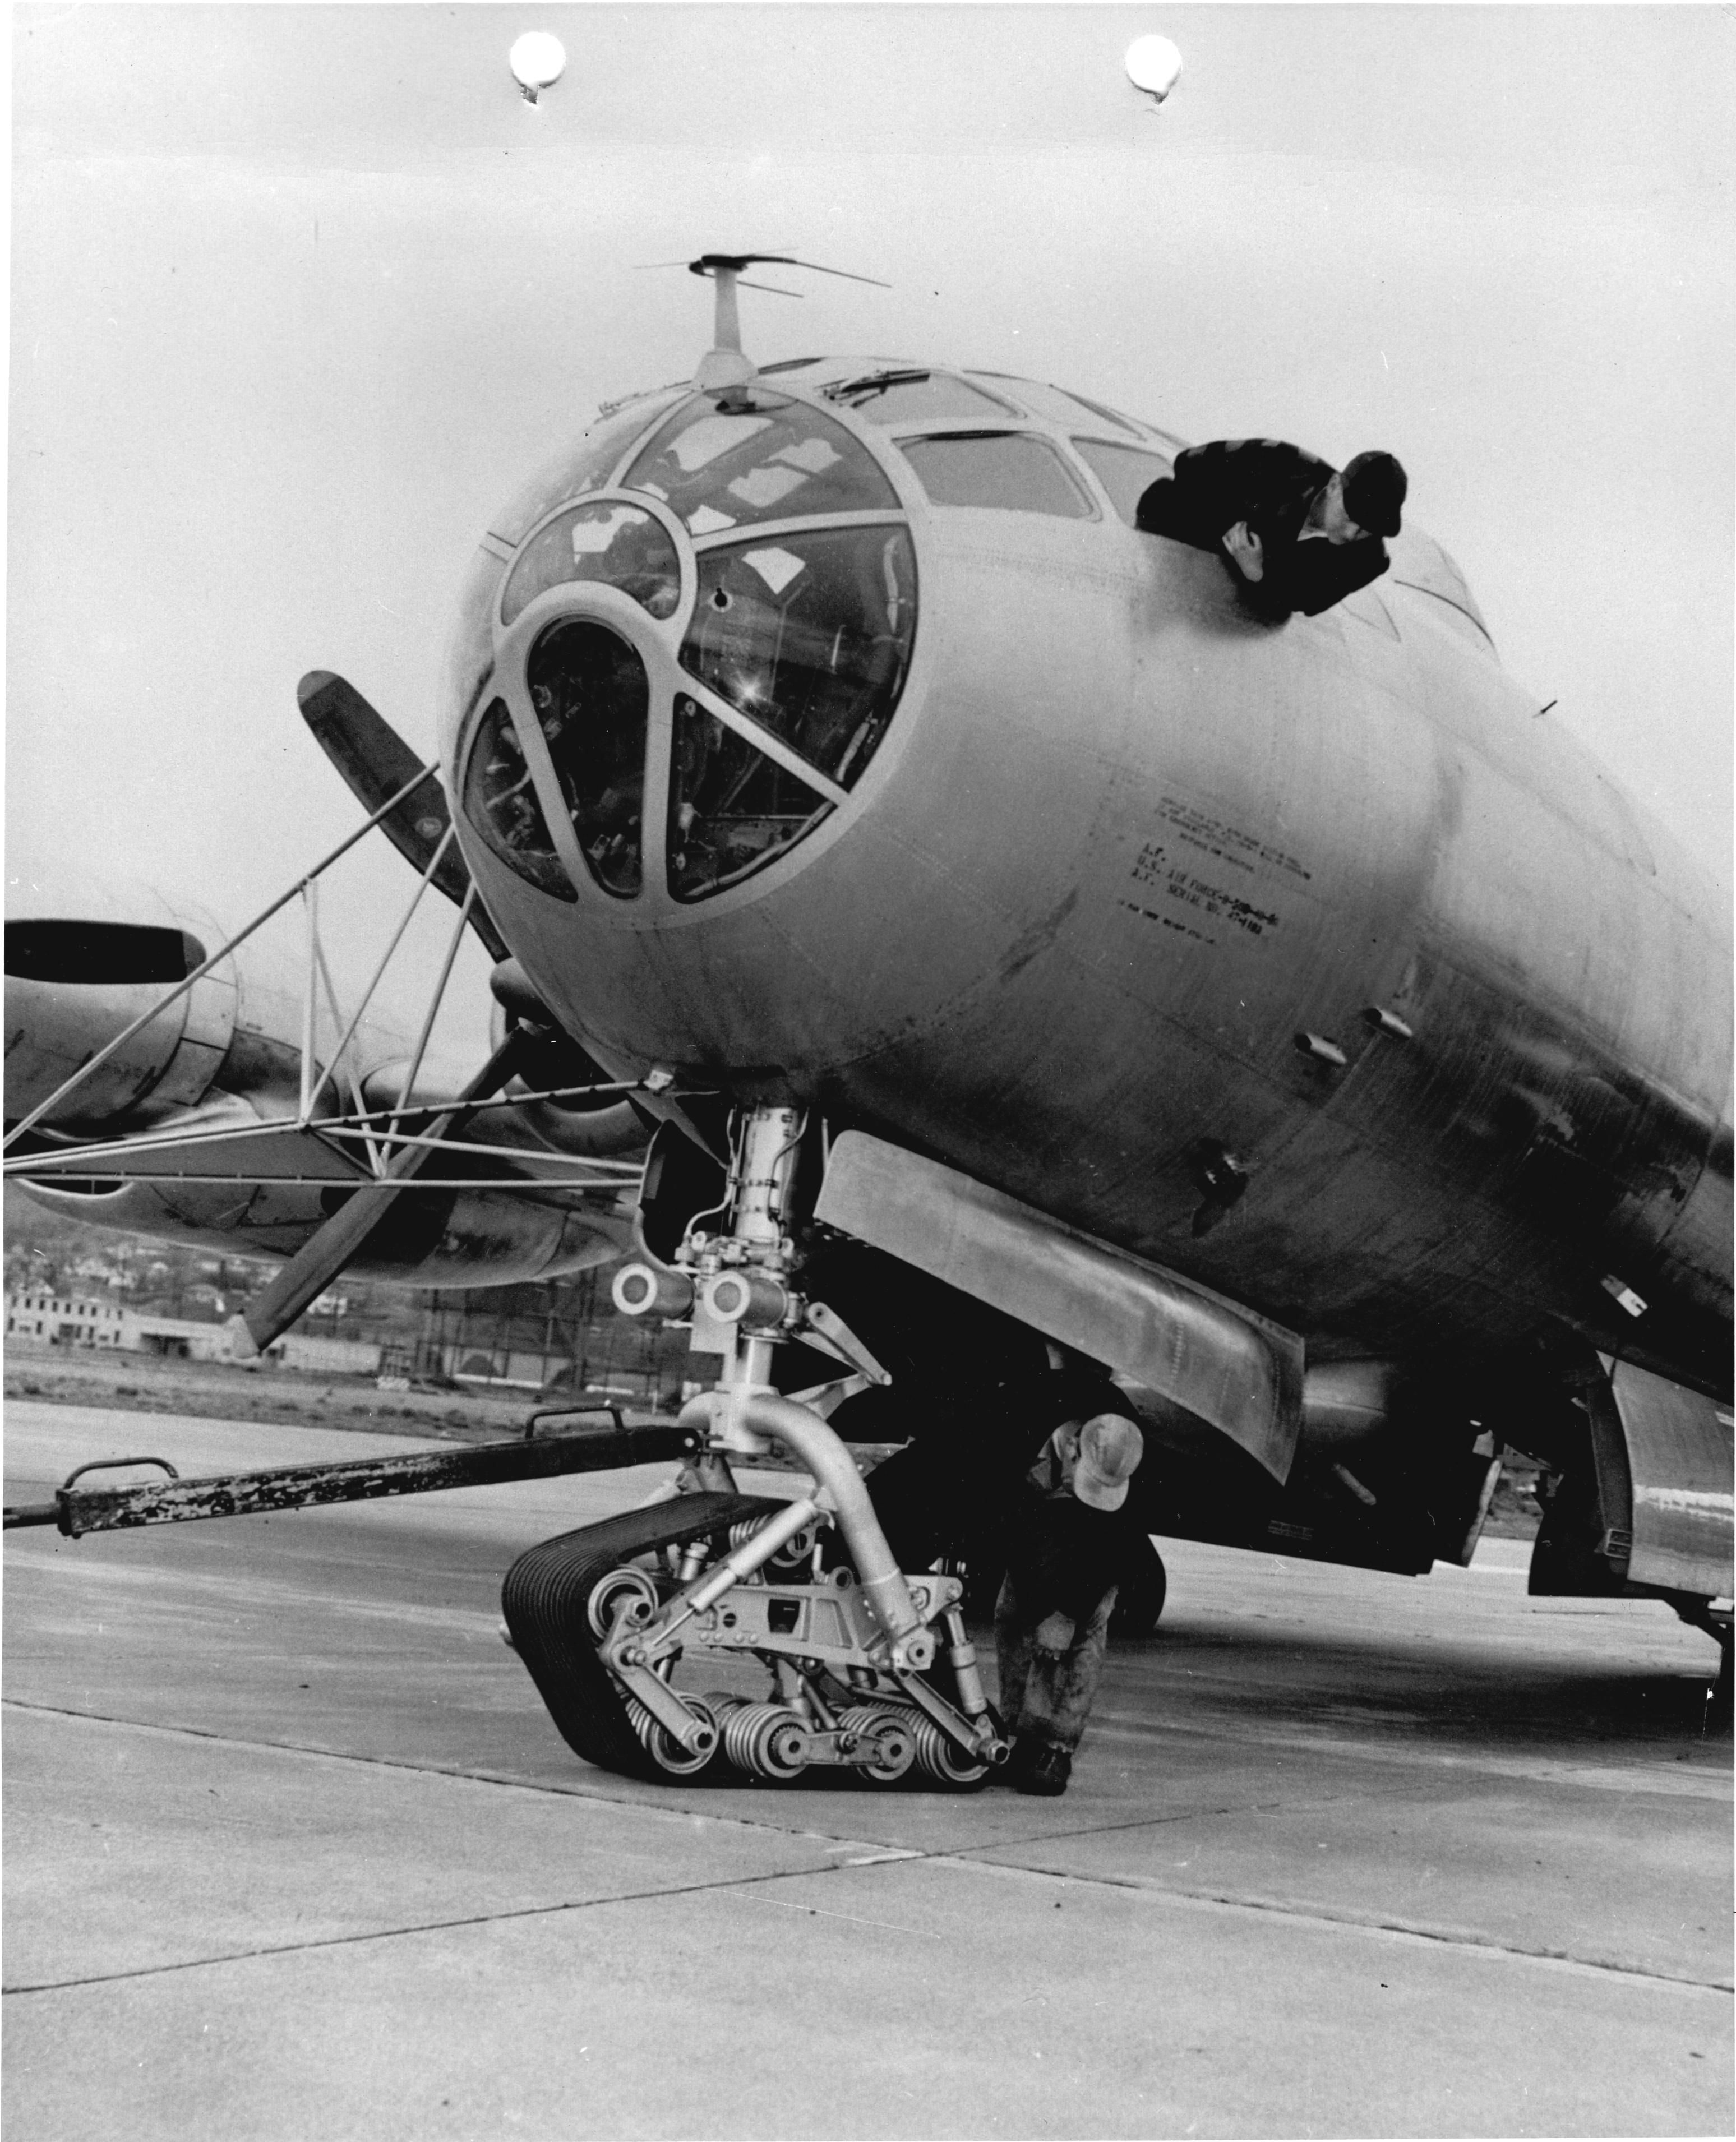 A Boeing B-50 parked on an airfield apron with track landing gear.